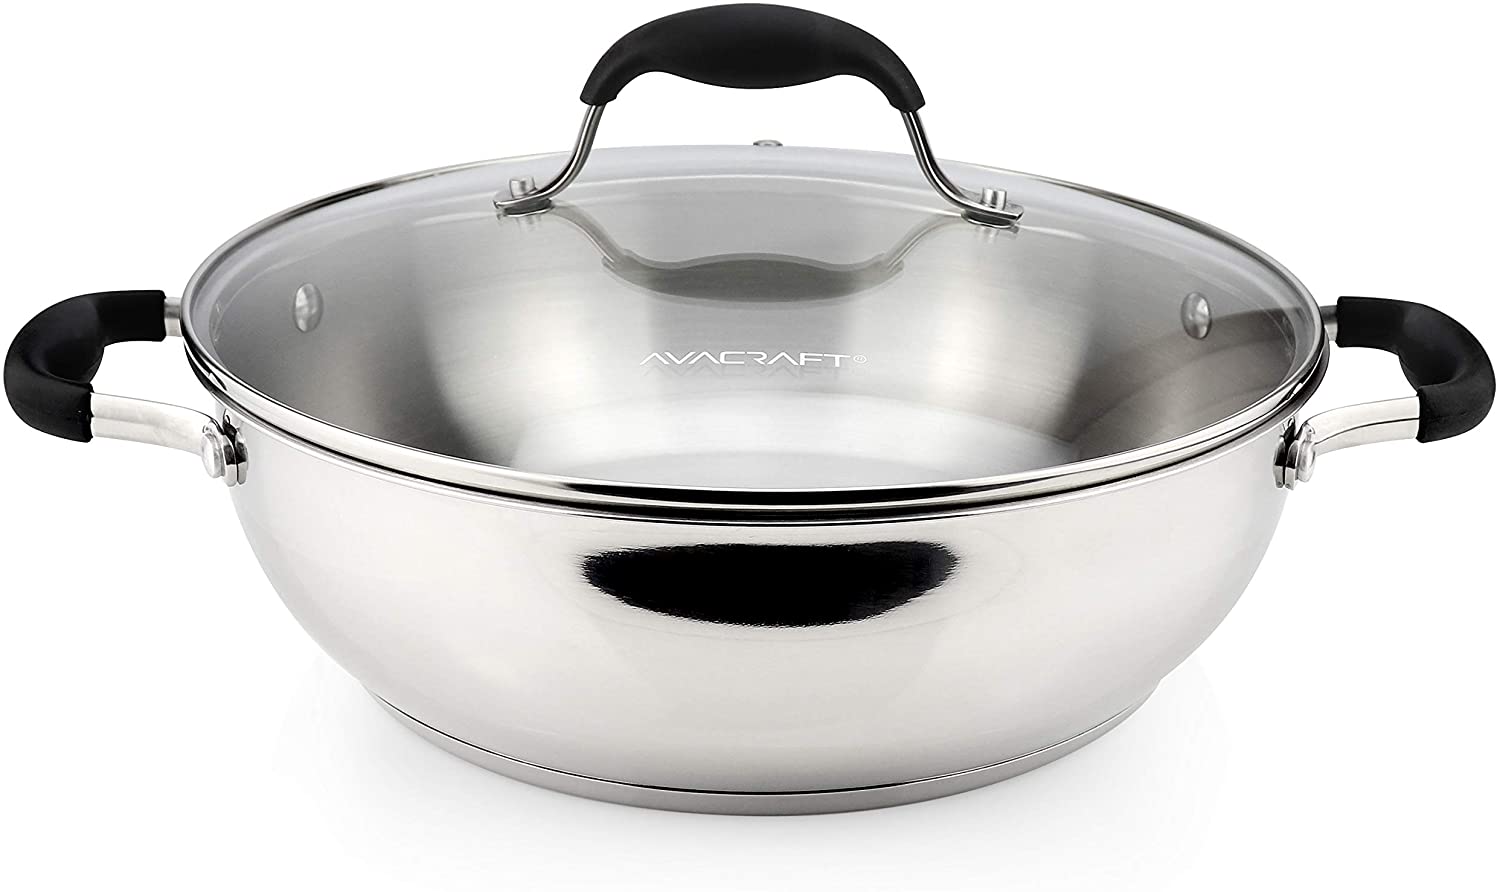 AVACRAFT 18/10 8 Inch Stainless Steel Frying Pan with Lid, Side Spouts,  Induction Pan, Versatile Stainless Steel Skillet, Fry Pan in our Pots and  Pans